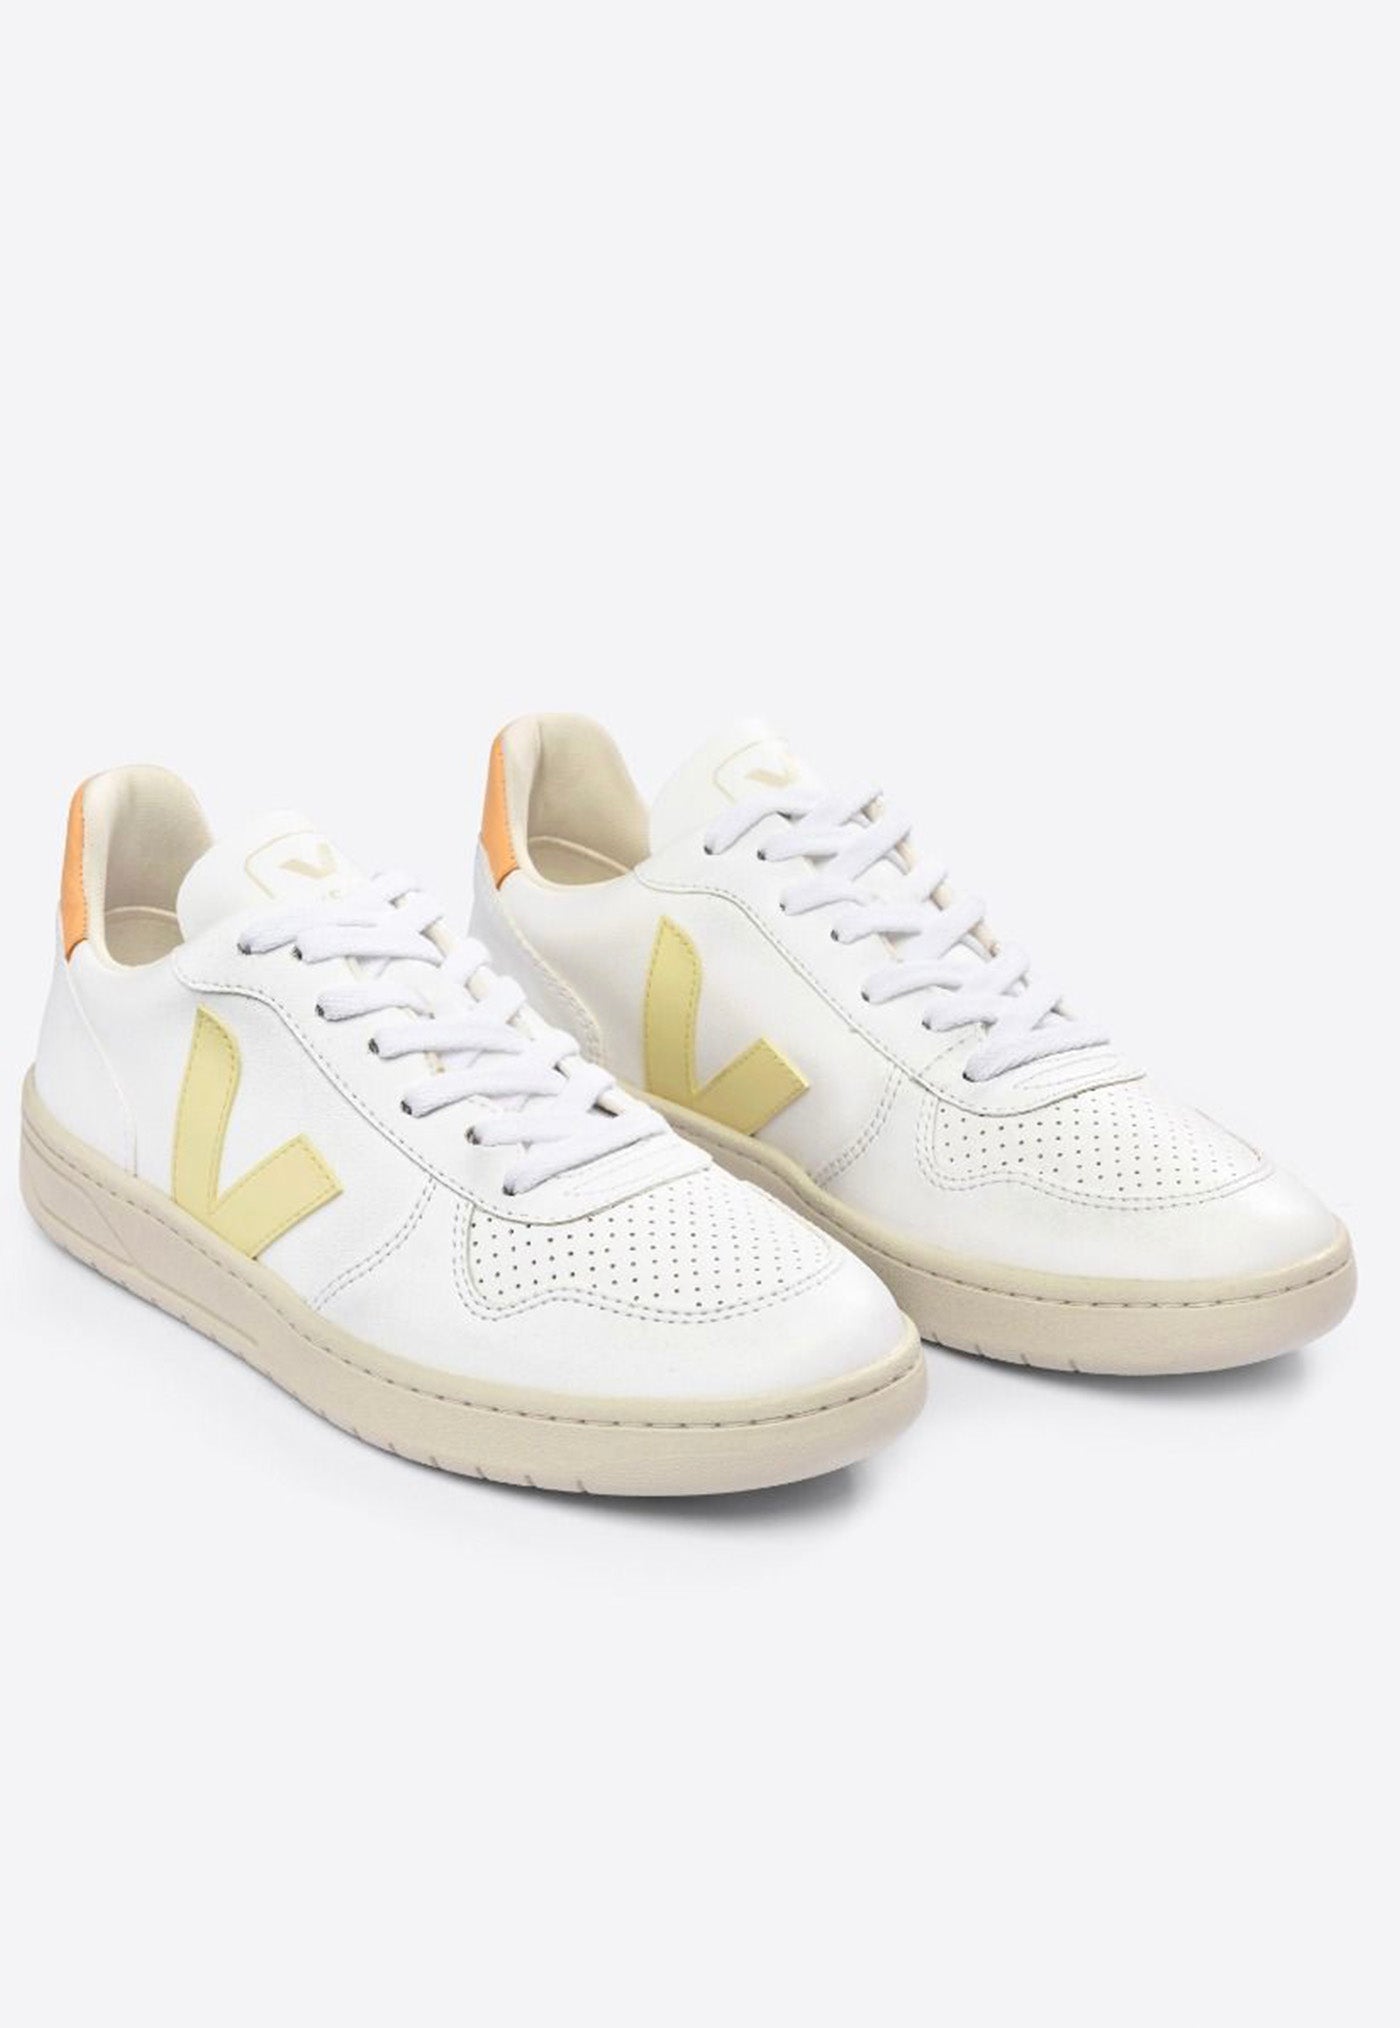 V-10 CWL Sneakers - White/Sun/Peach sold by Angel Divine